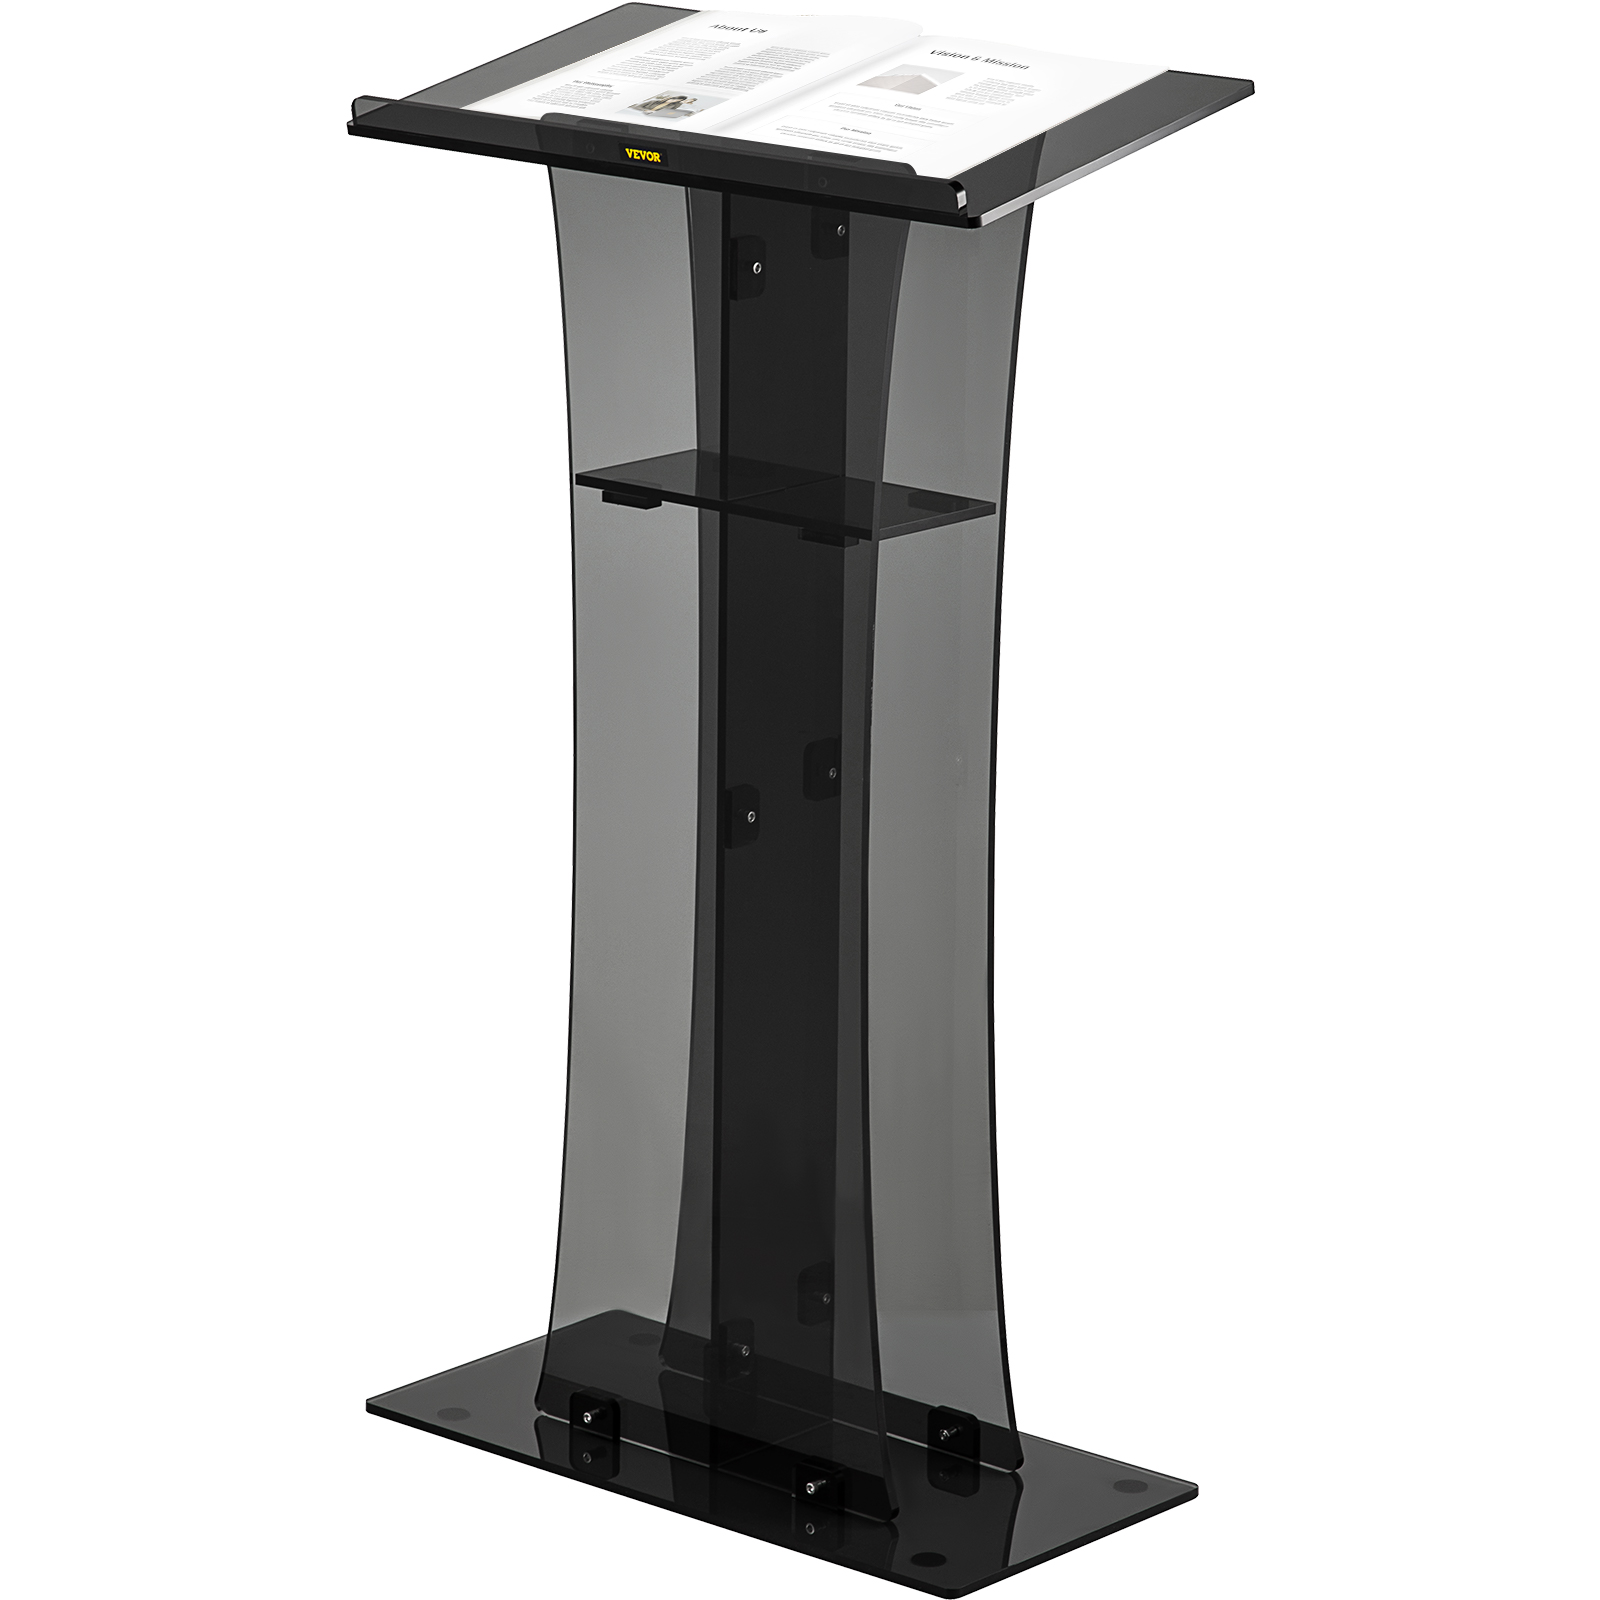 Classic Style Event Reception School Lectern for Restaurants Office and Classrooms Weddings Clear Acrylic Podium Stand Desk for Churches Plexiglass Pulpit for Churches 